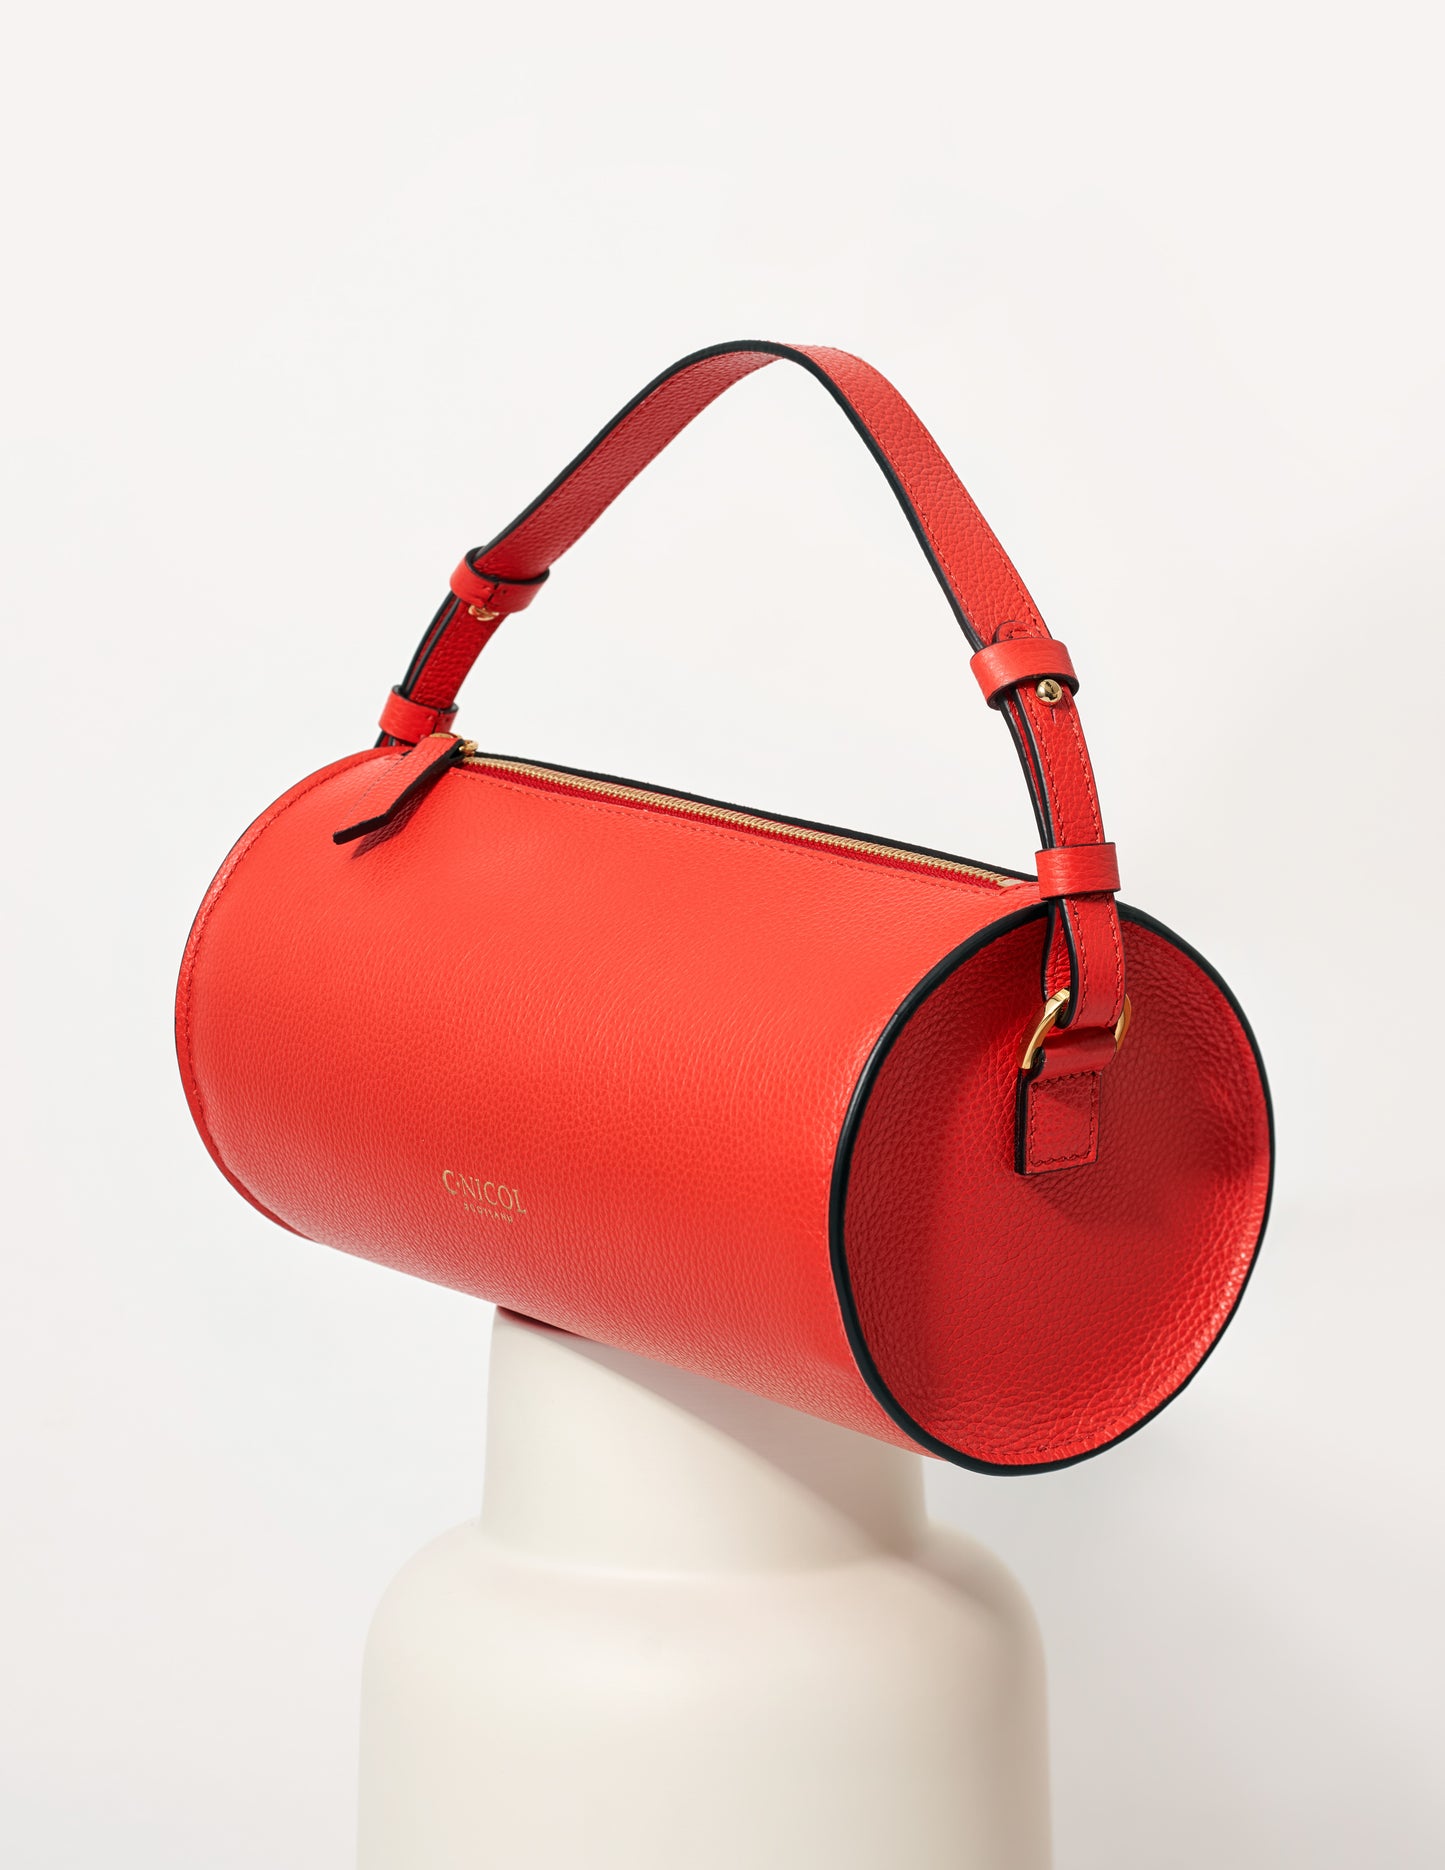 CNicol Red Leather Evie Bag on White Base